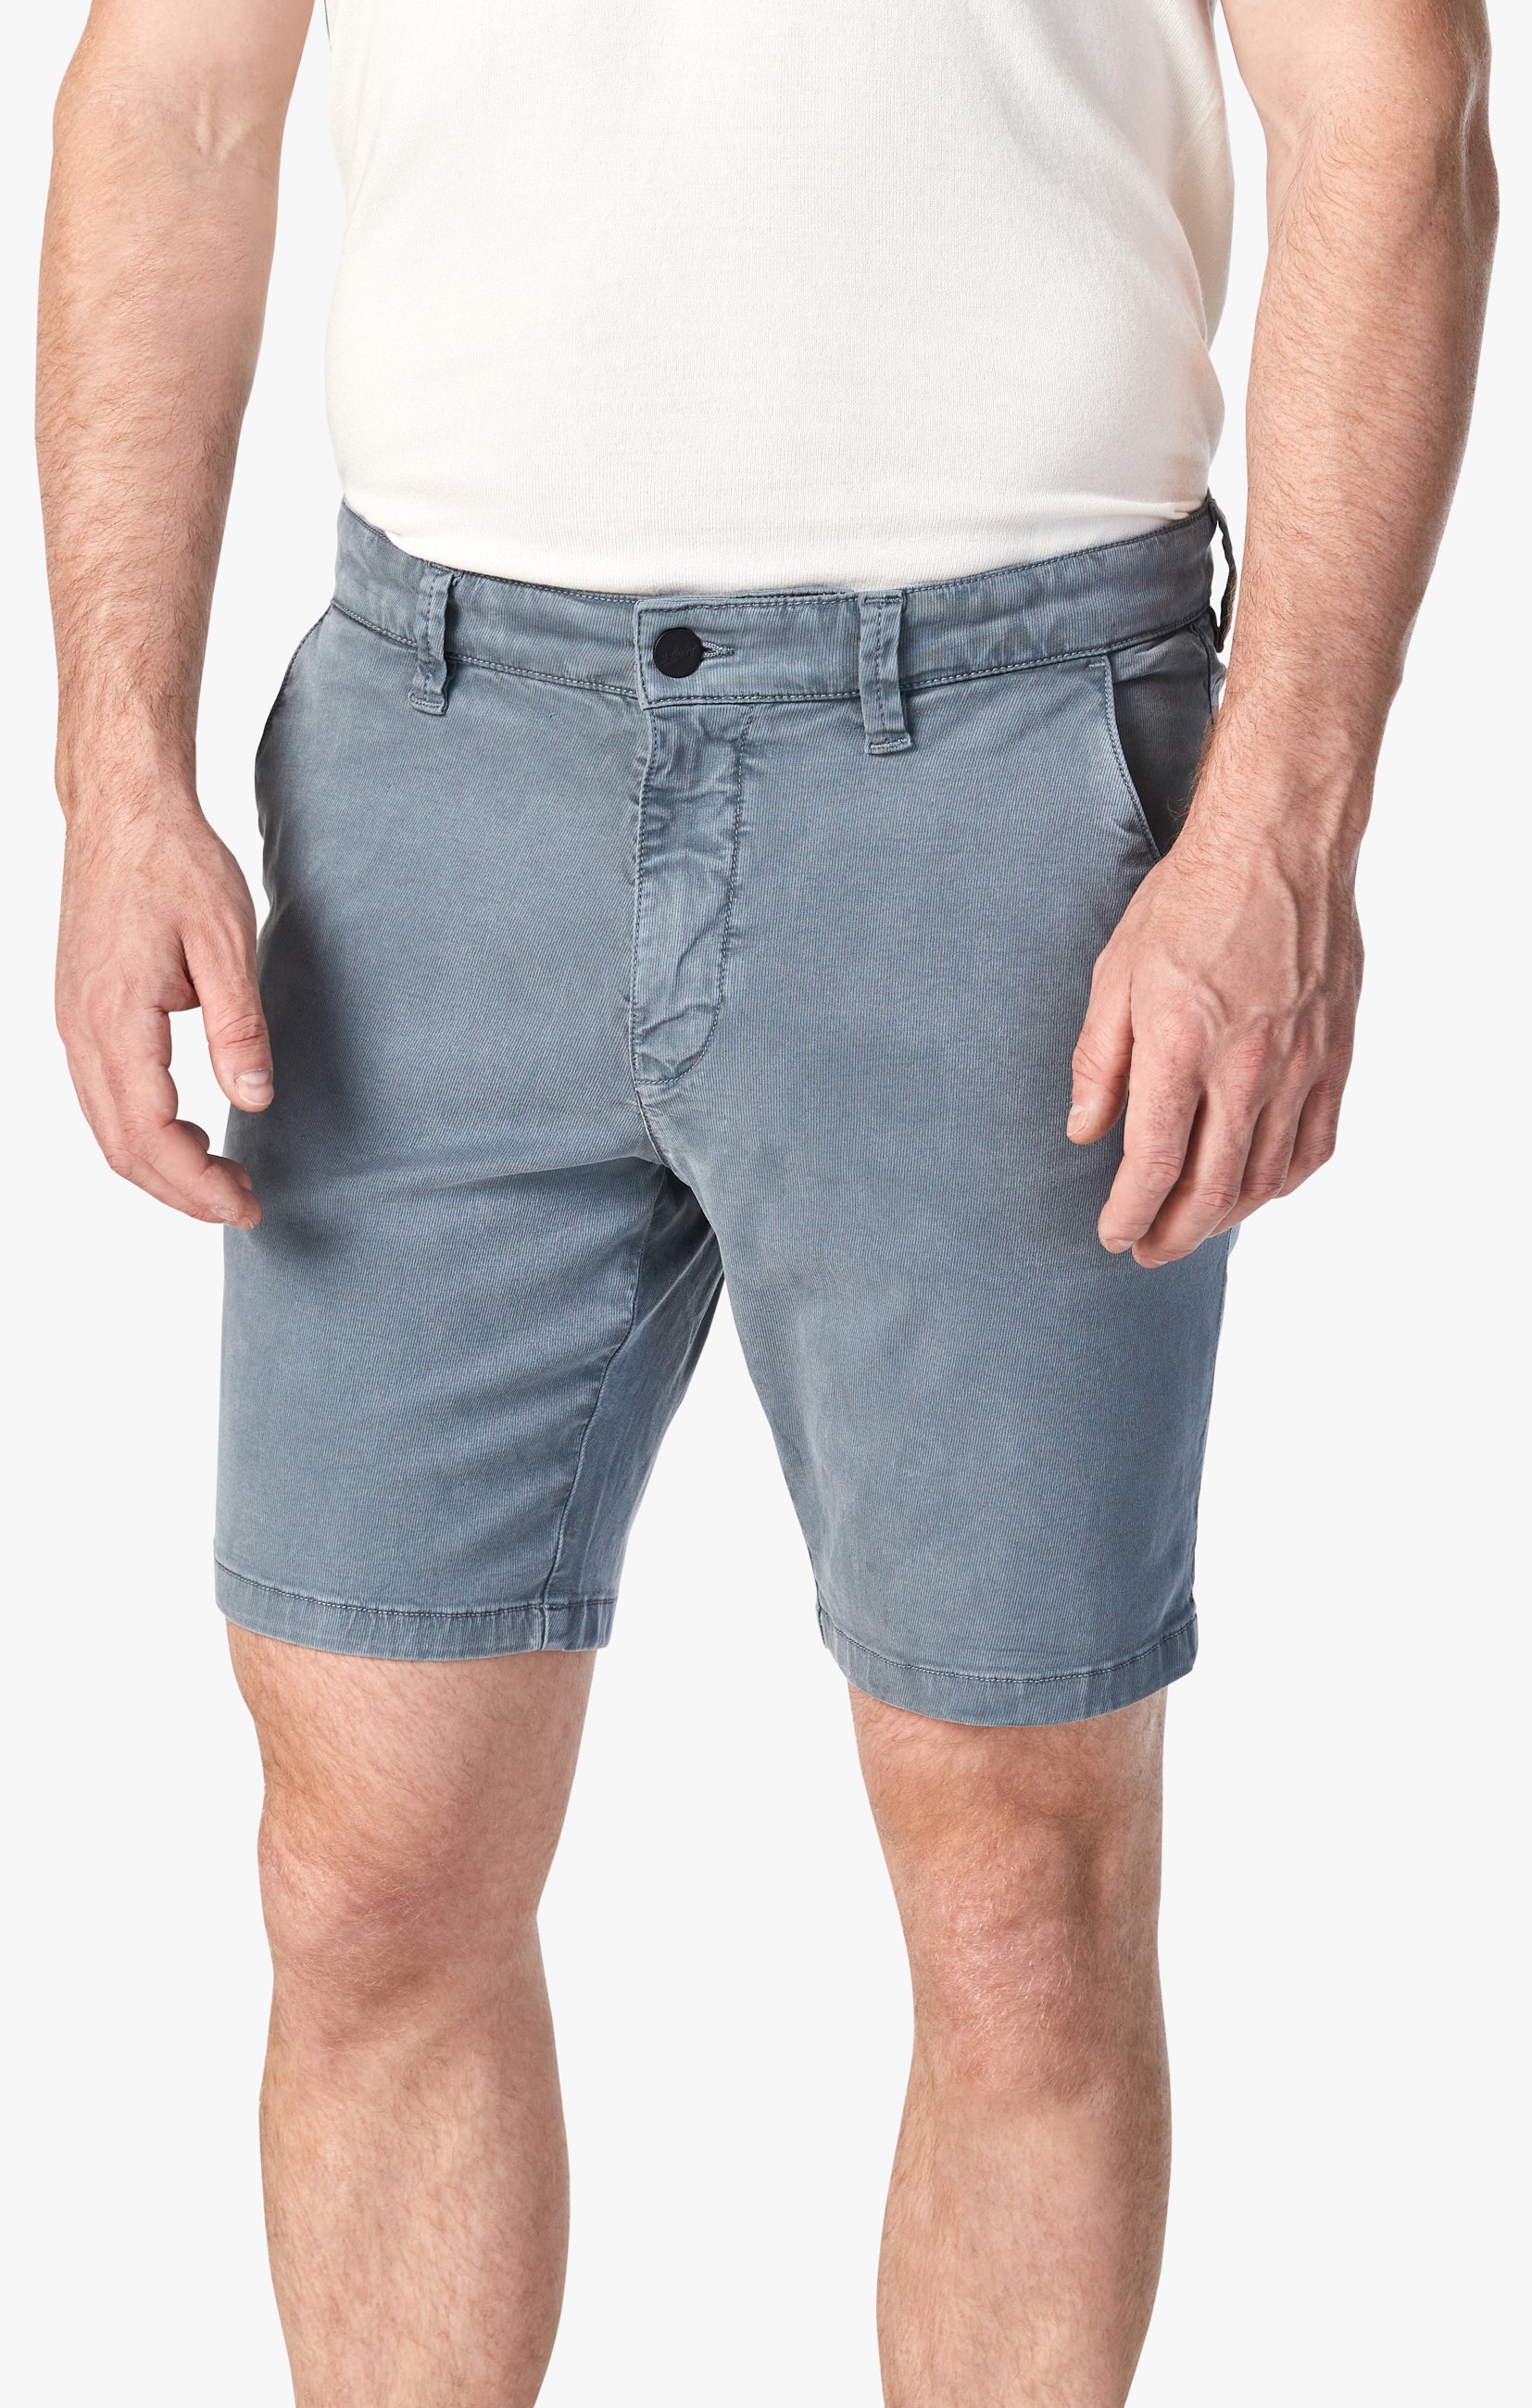 Arizona Shorts In Stormy Weather Soft Touch